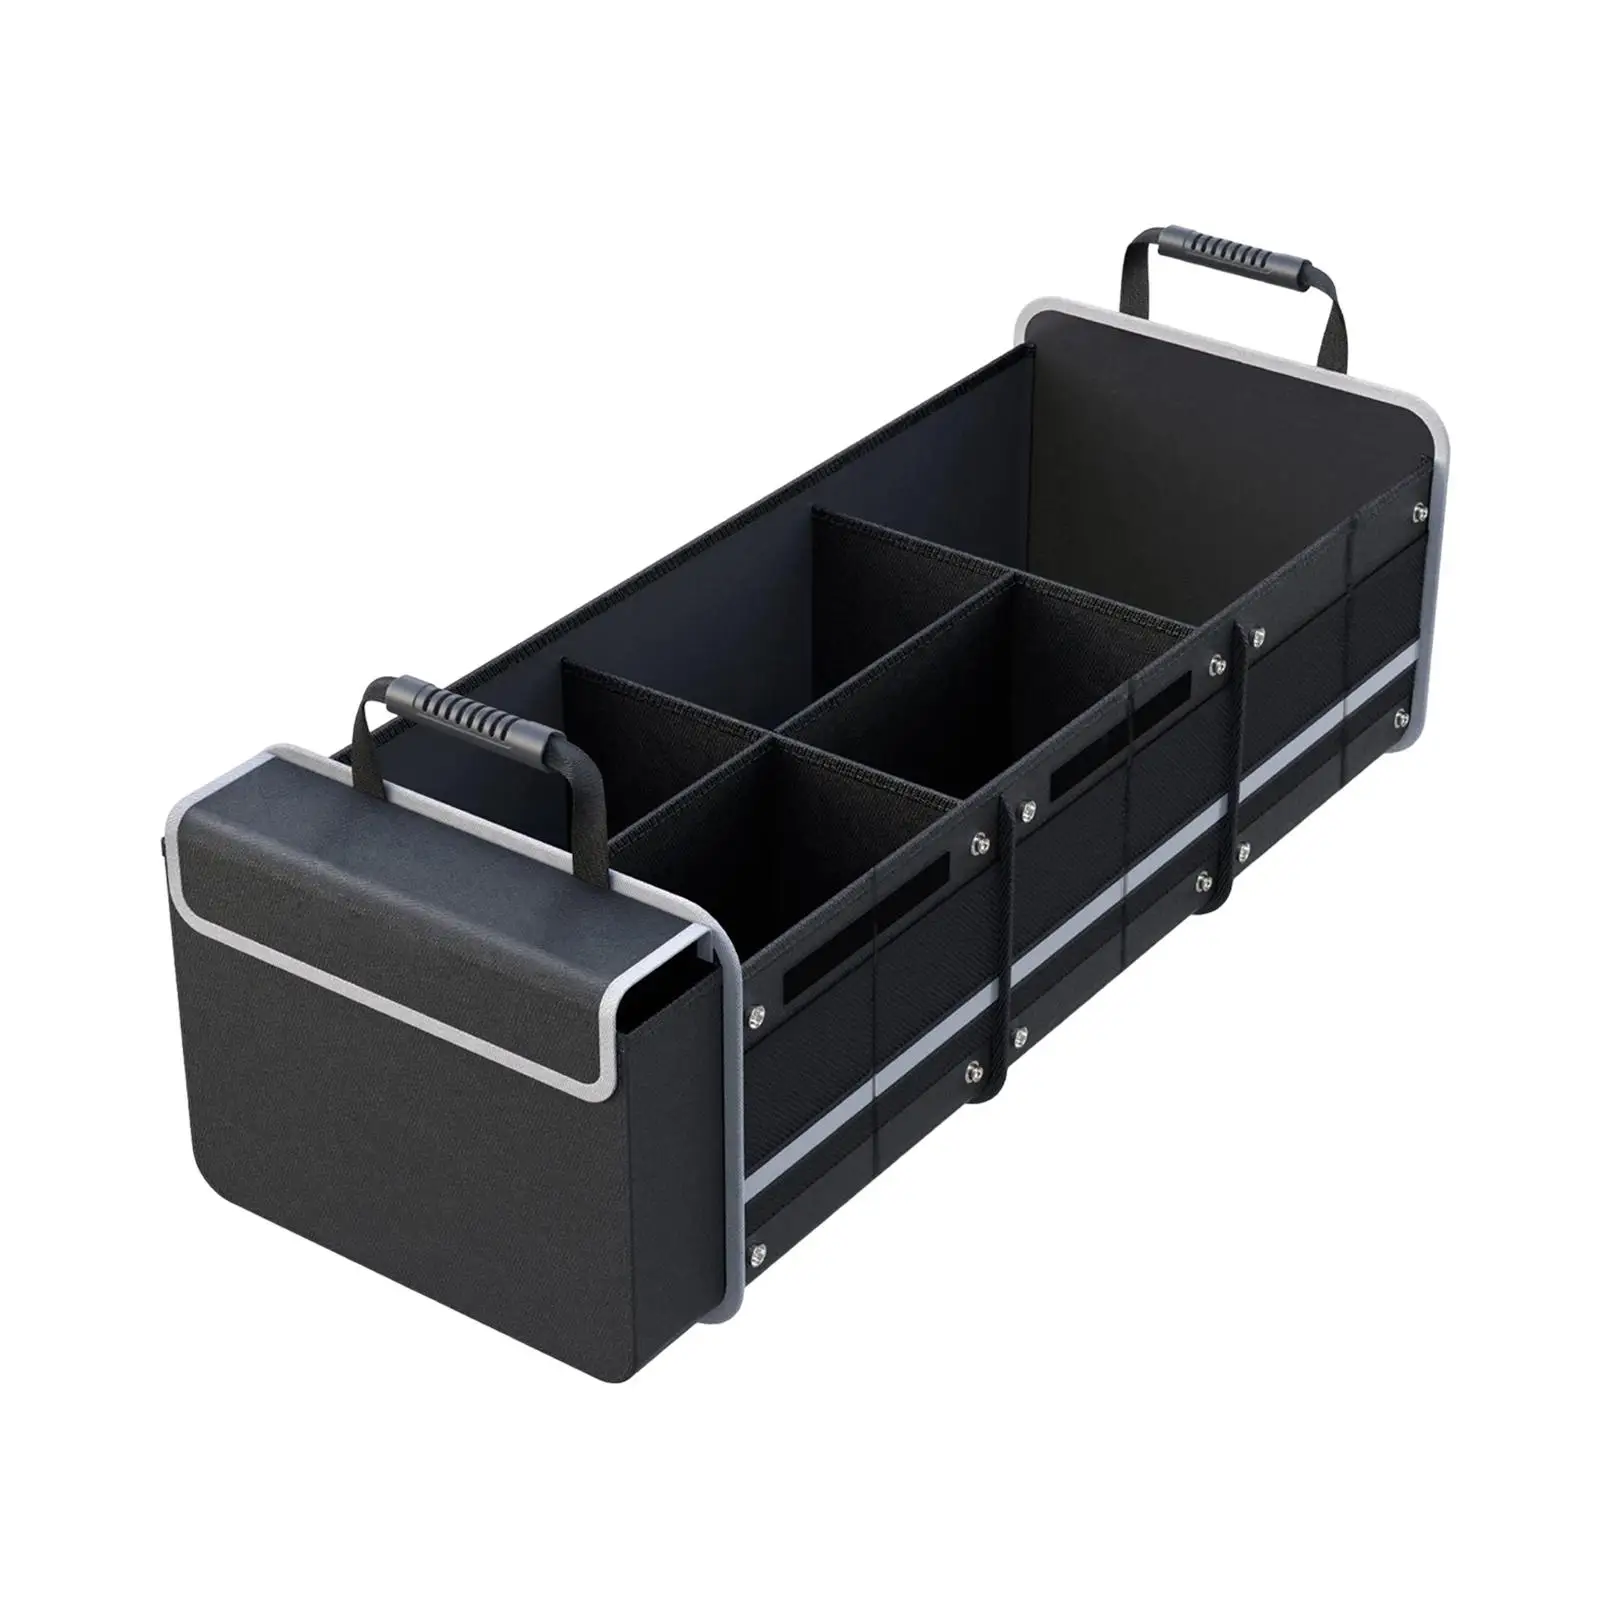 Car Trunk Organizer Collapsible Cargo Storage Container for Automotive Sedans